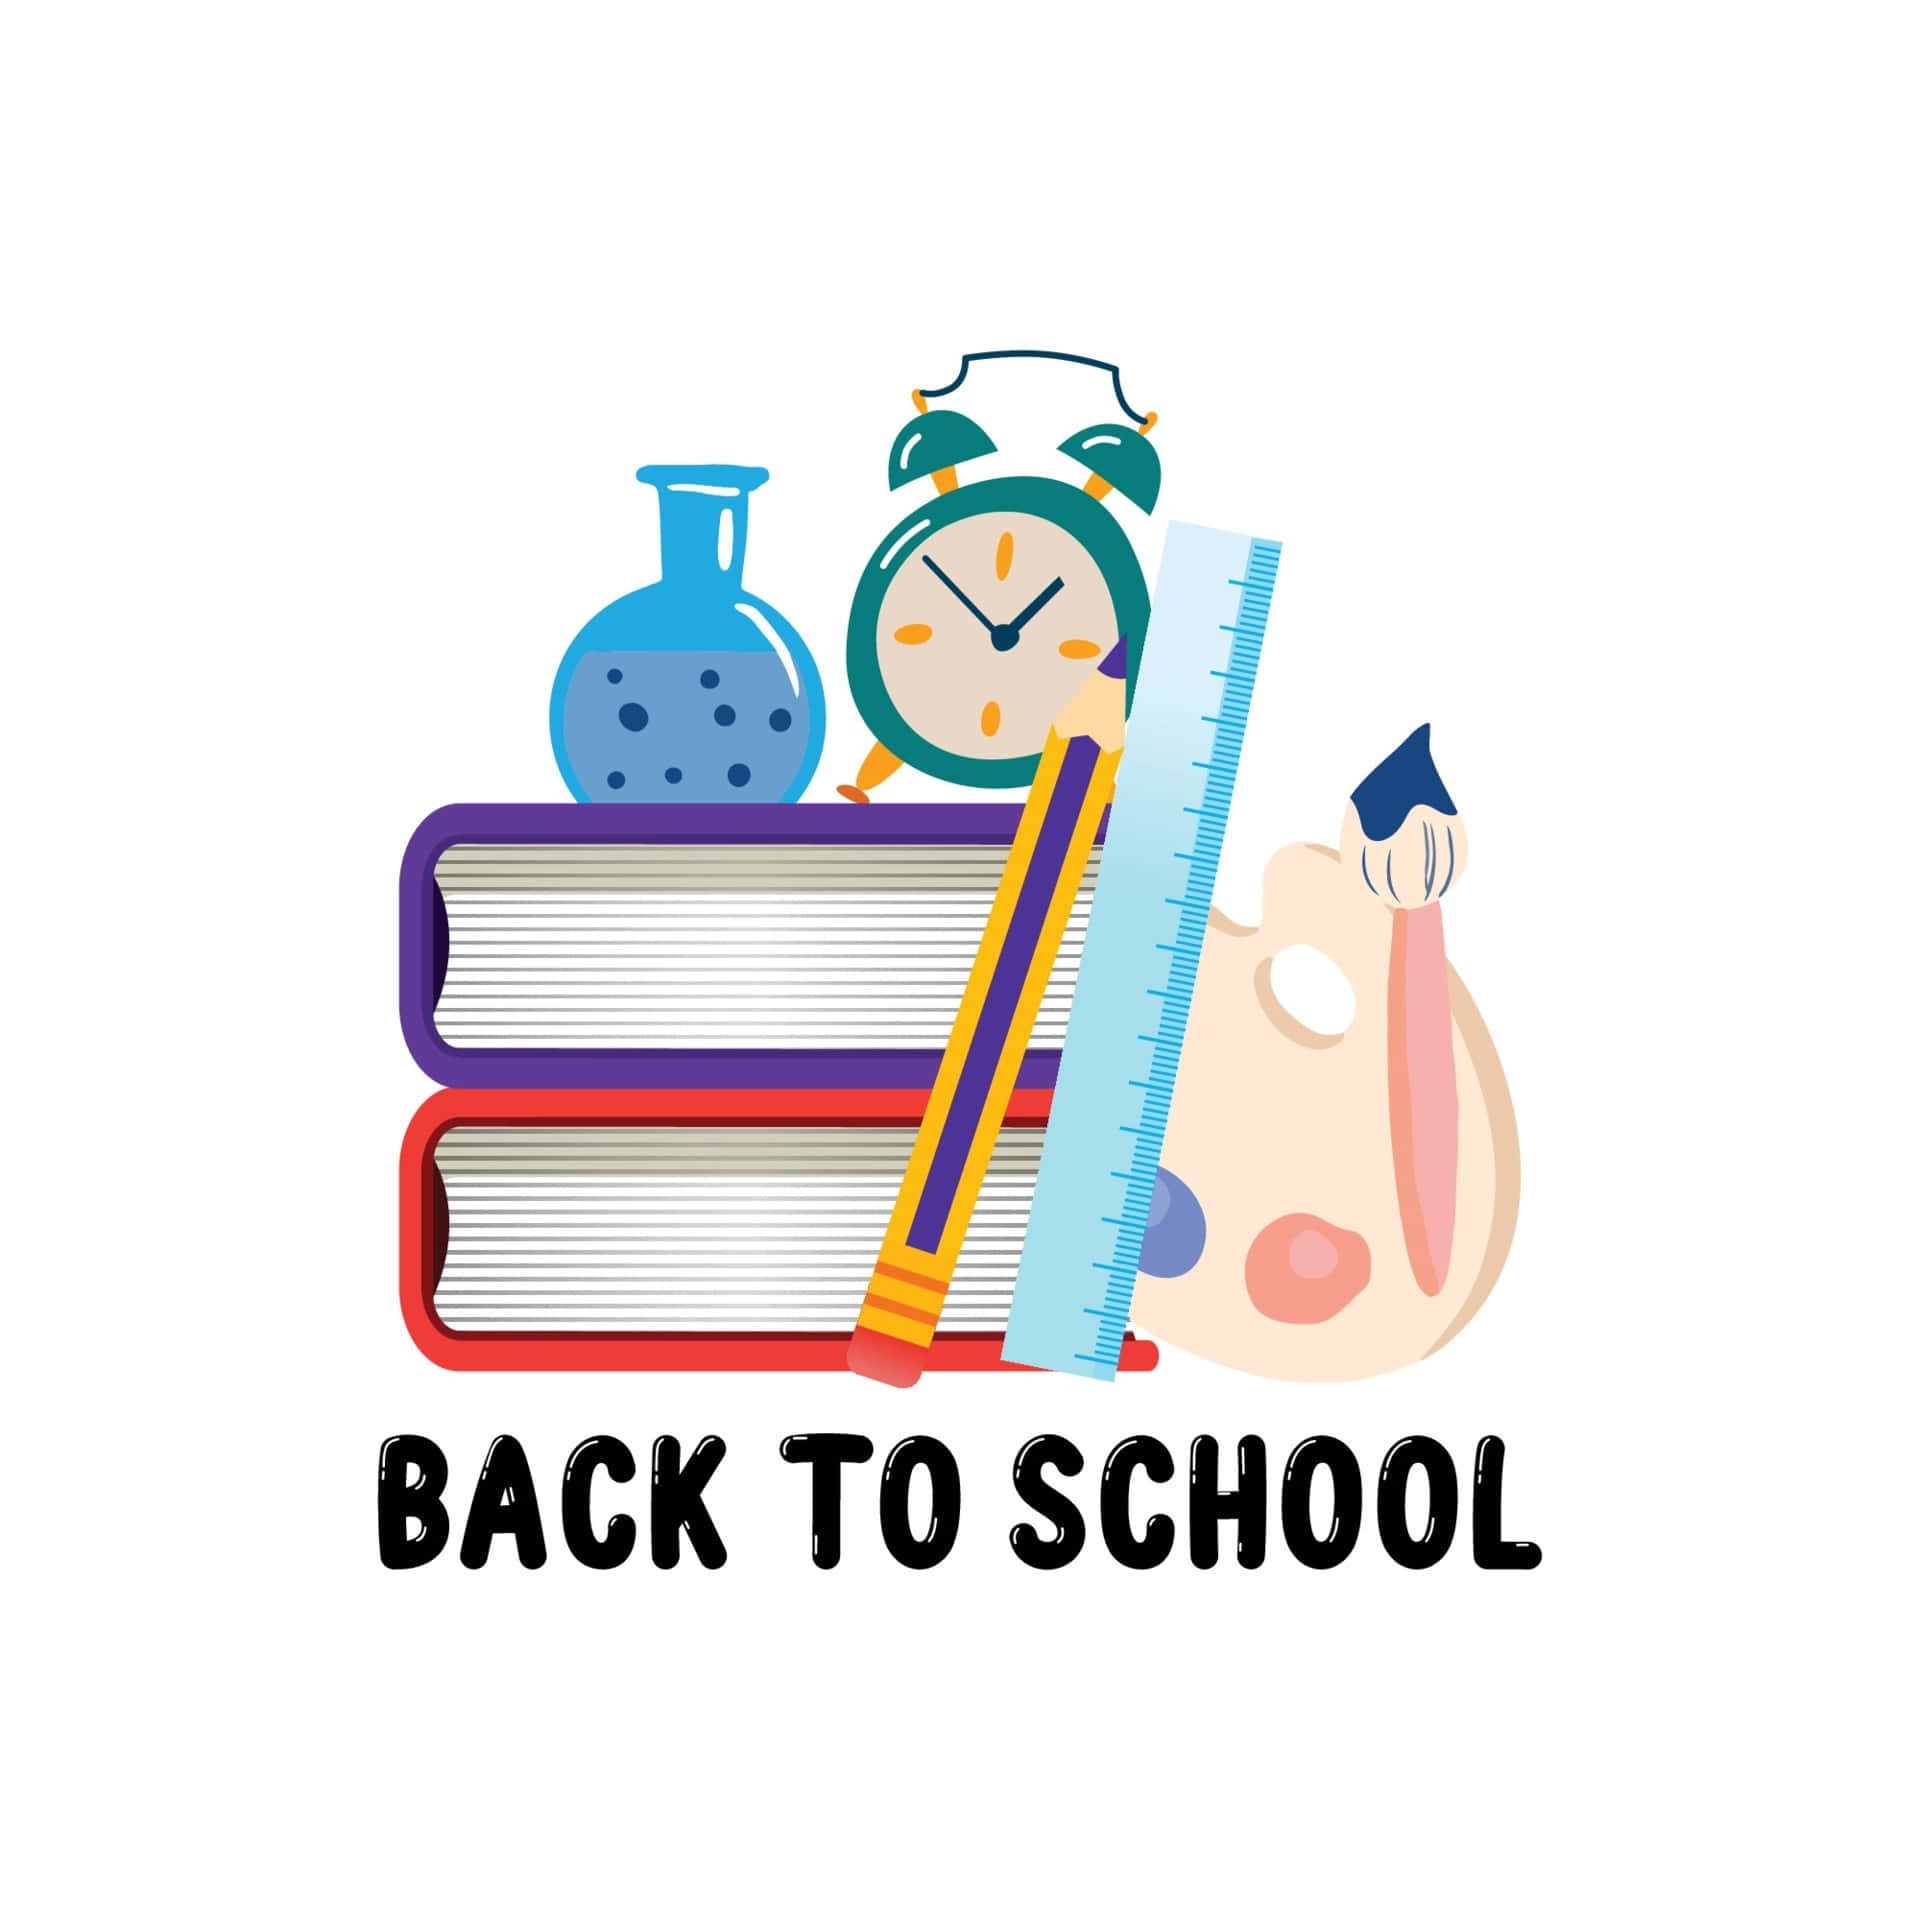 Back To School Icons With Books, Pencils, And A Clock